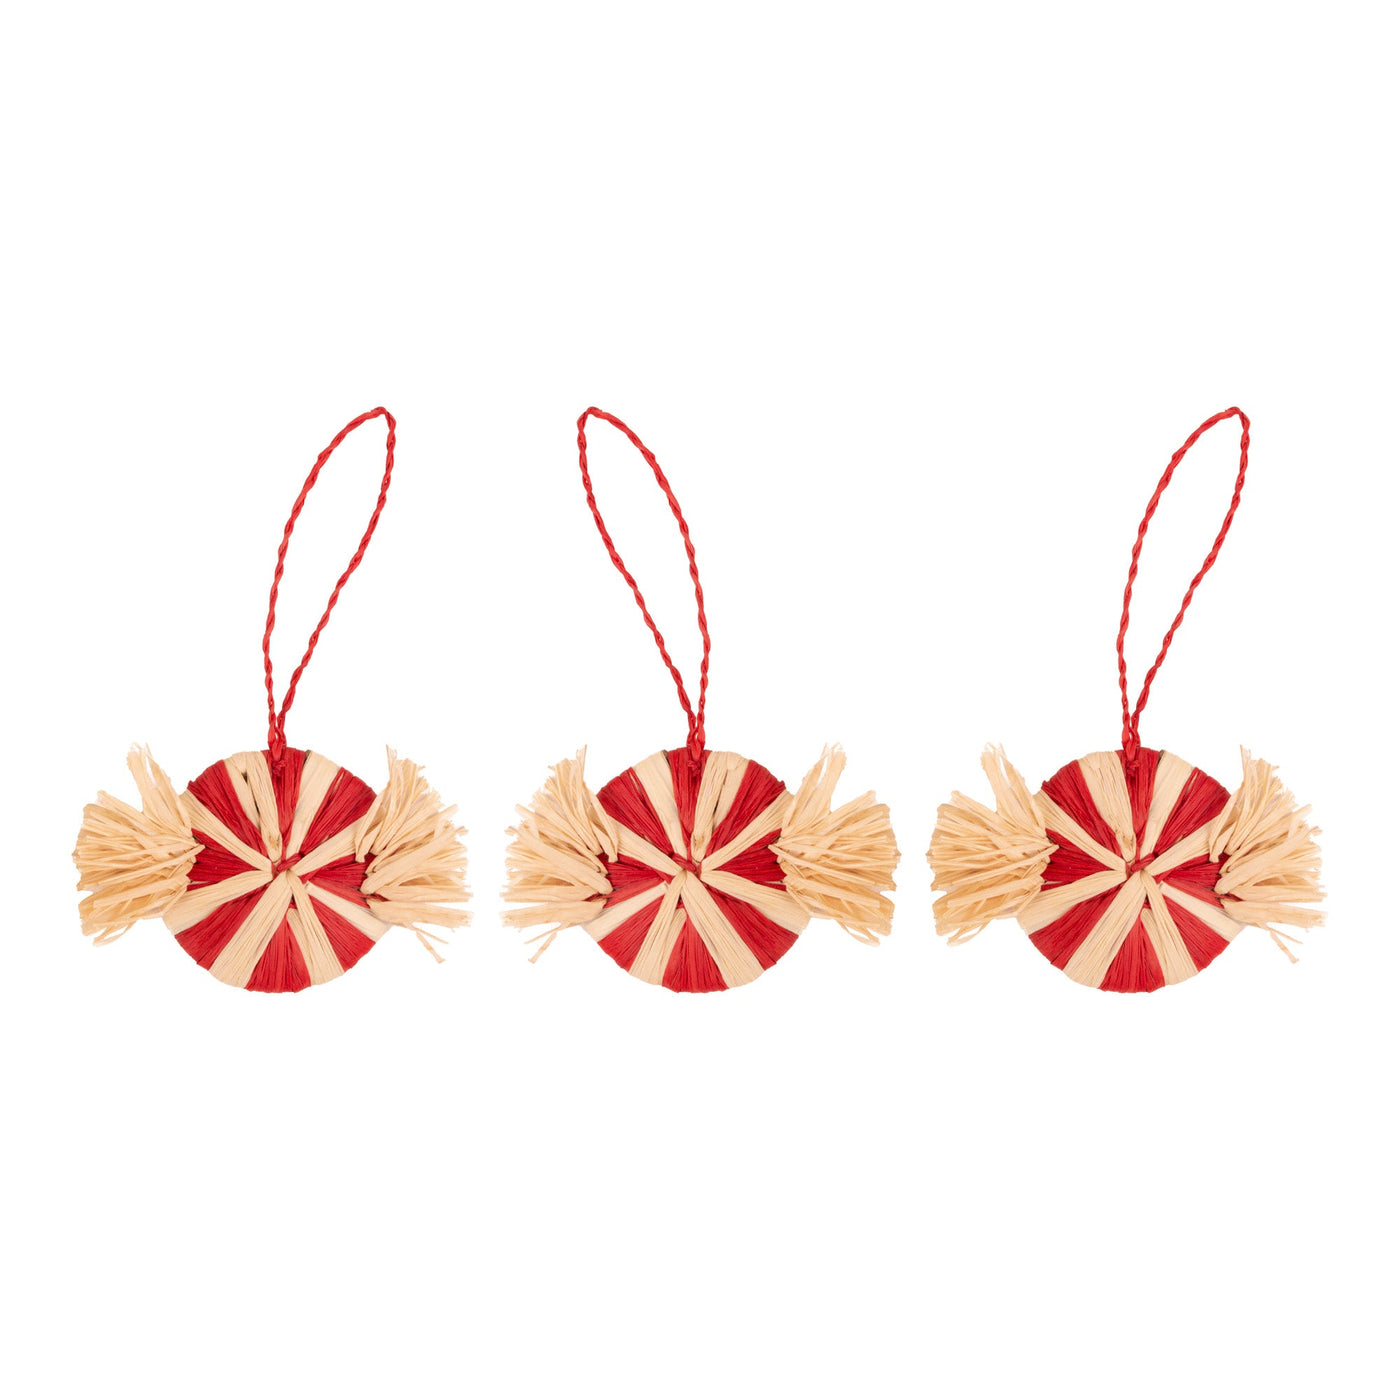 Peppermint Candy Ornaments, Set of 3